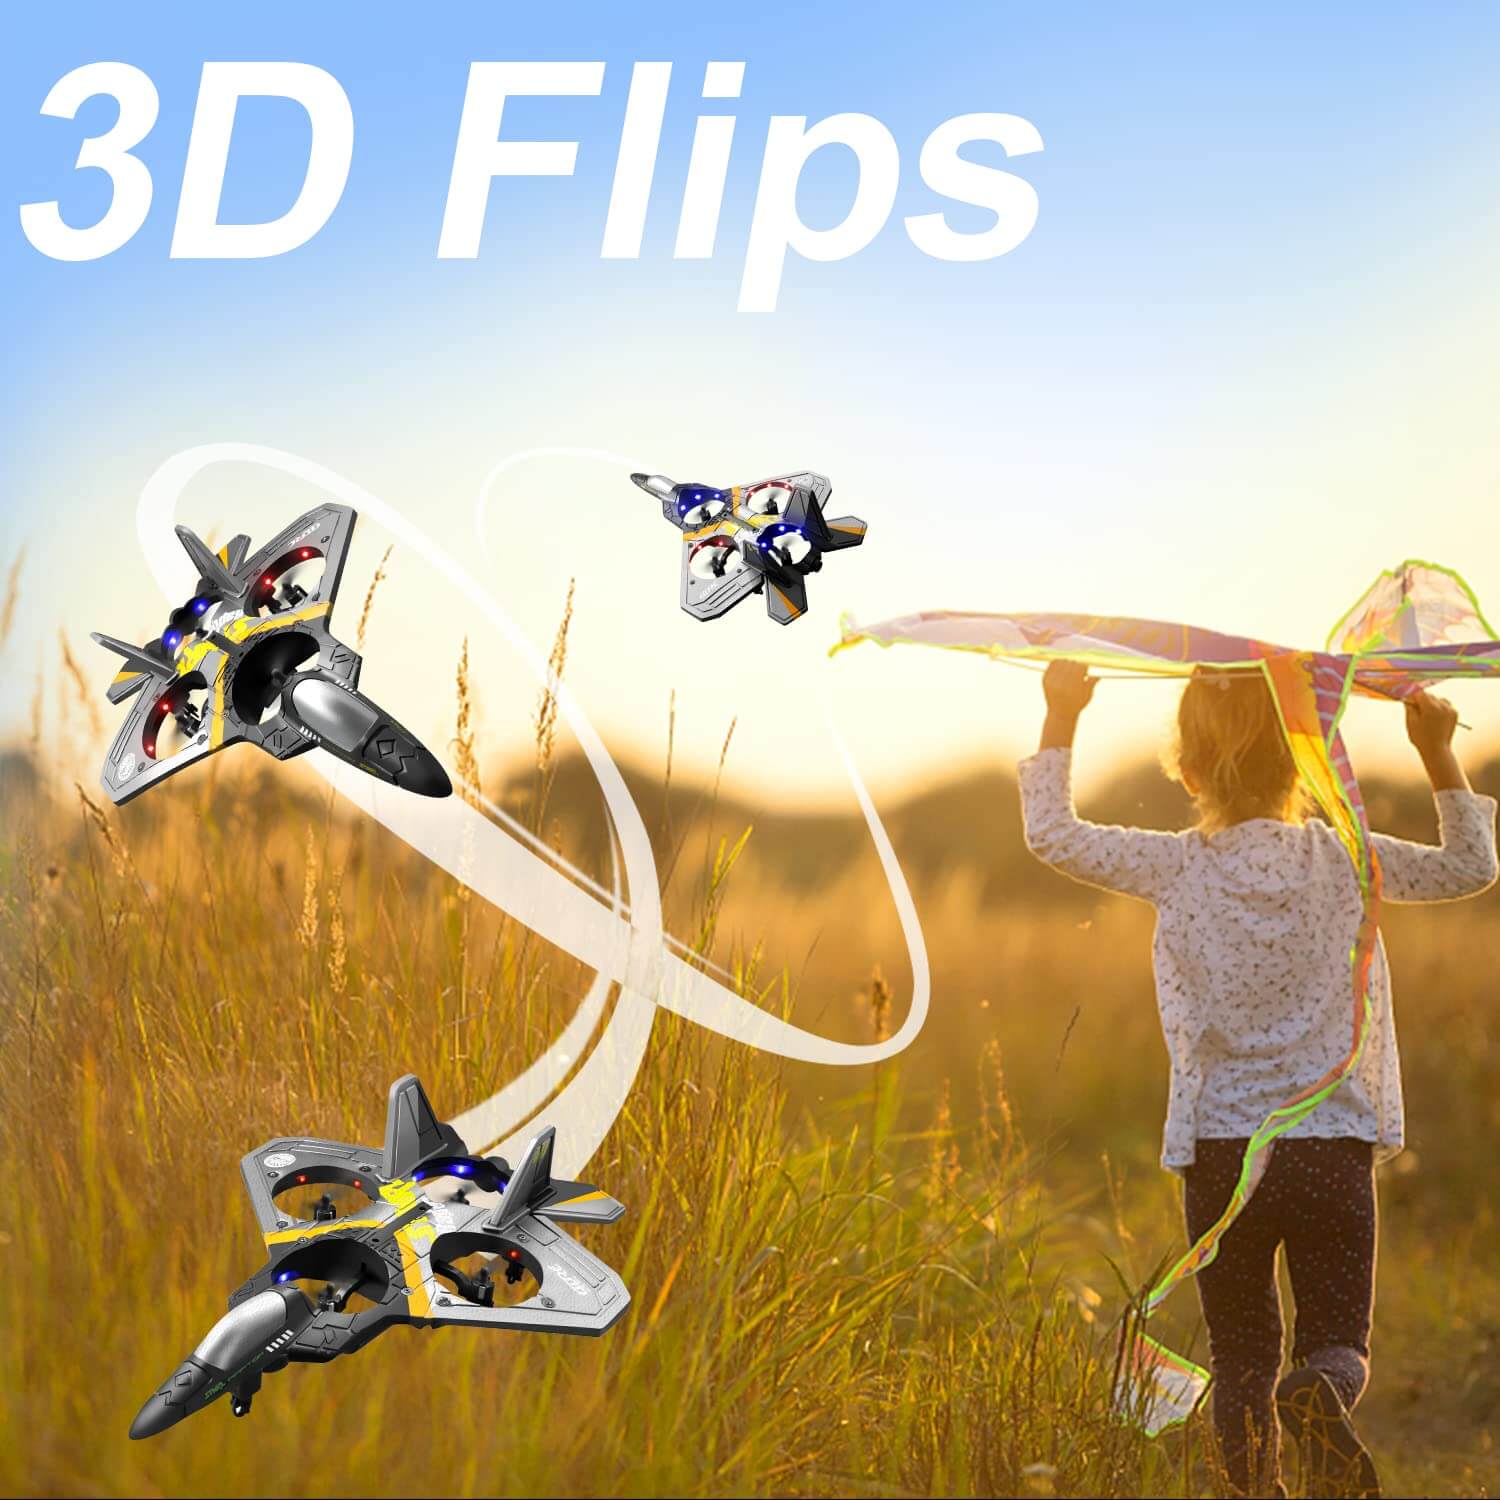 Kids RC Airplane Drone 2.4G Remote Control Aircraft with Gravity Sensing Stunt Spin Jet